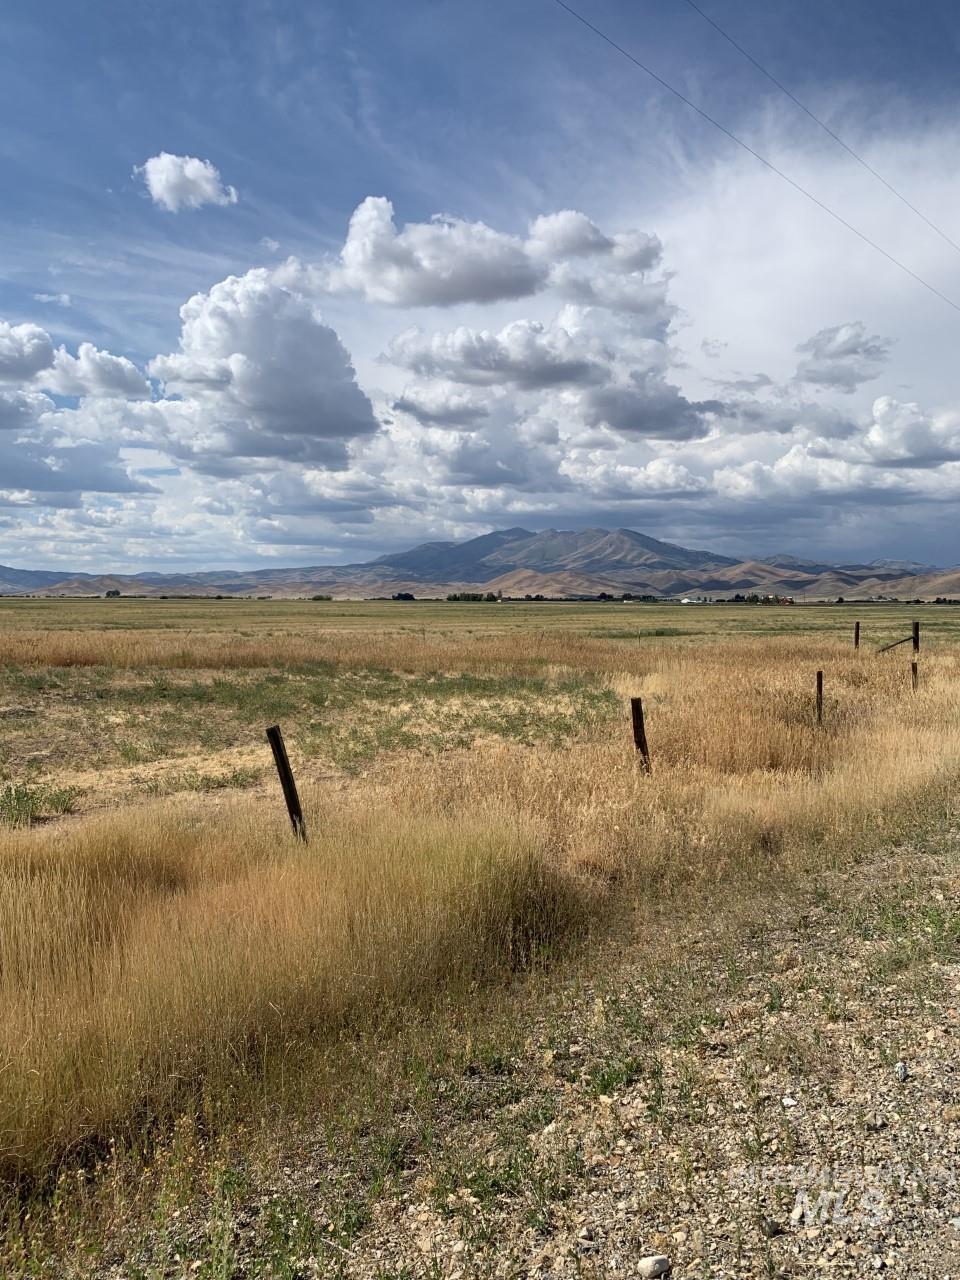 TBD - P2 Soldier Road, Fairfield, Idaho 83327, Land For Sale, Price $65,000,MLS 98855706